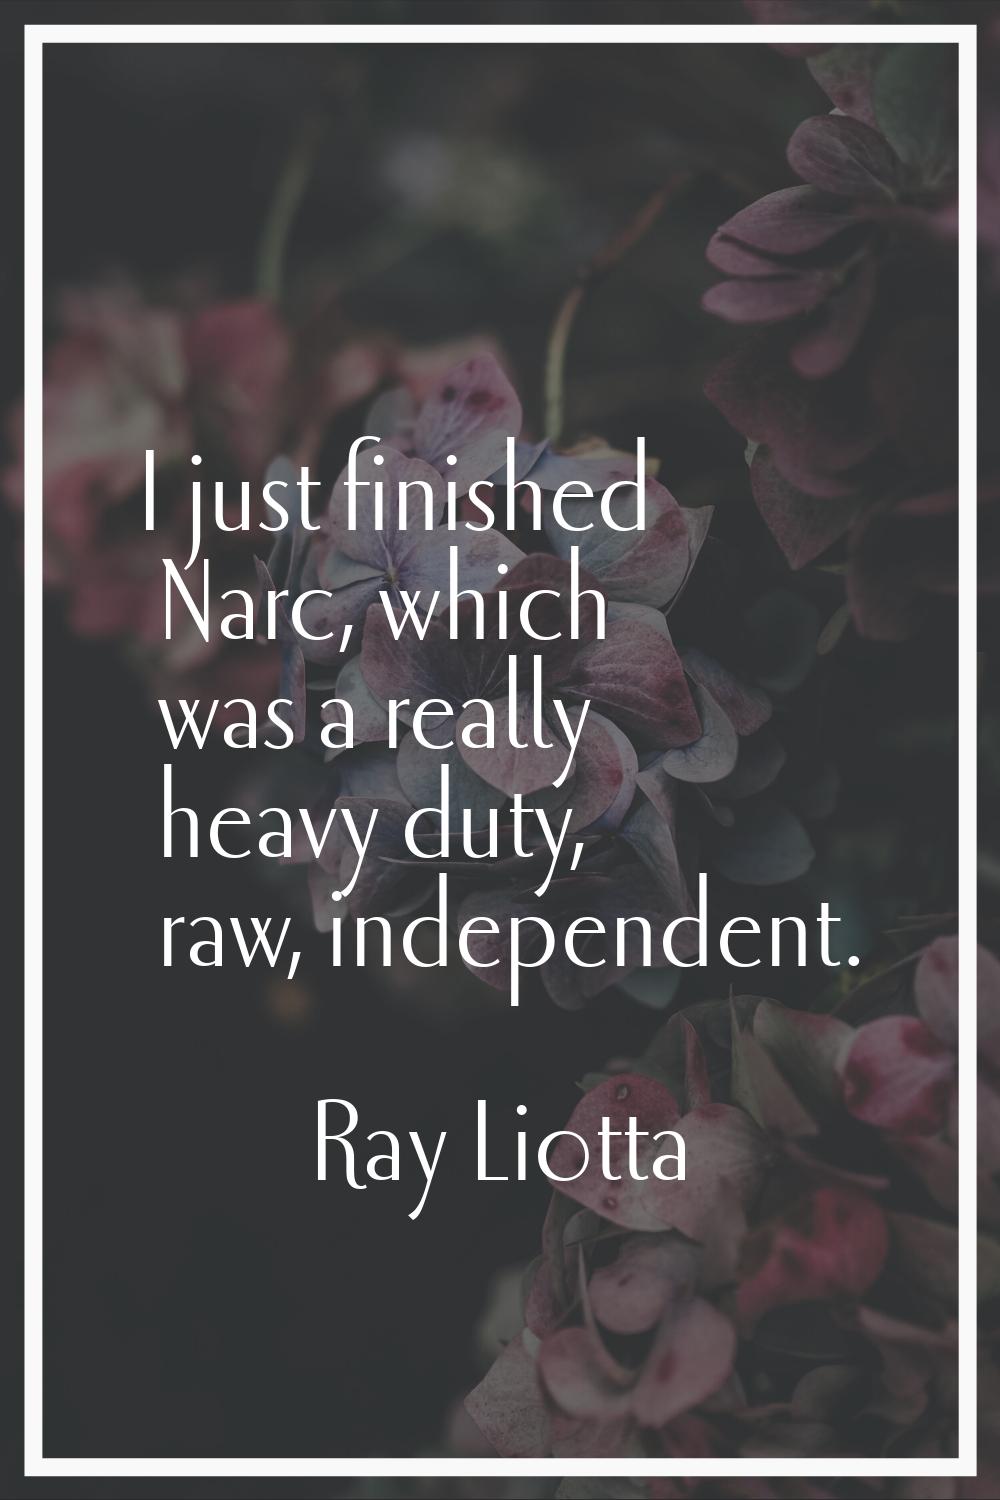 I just finished Narc, which was a really heavy duty, raw, independent.